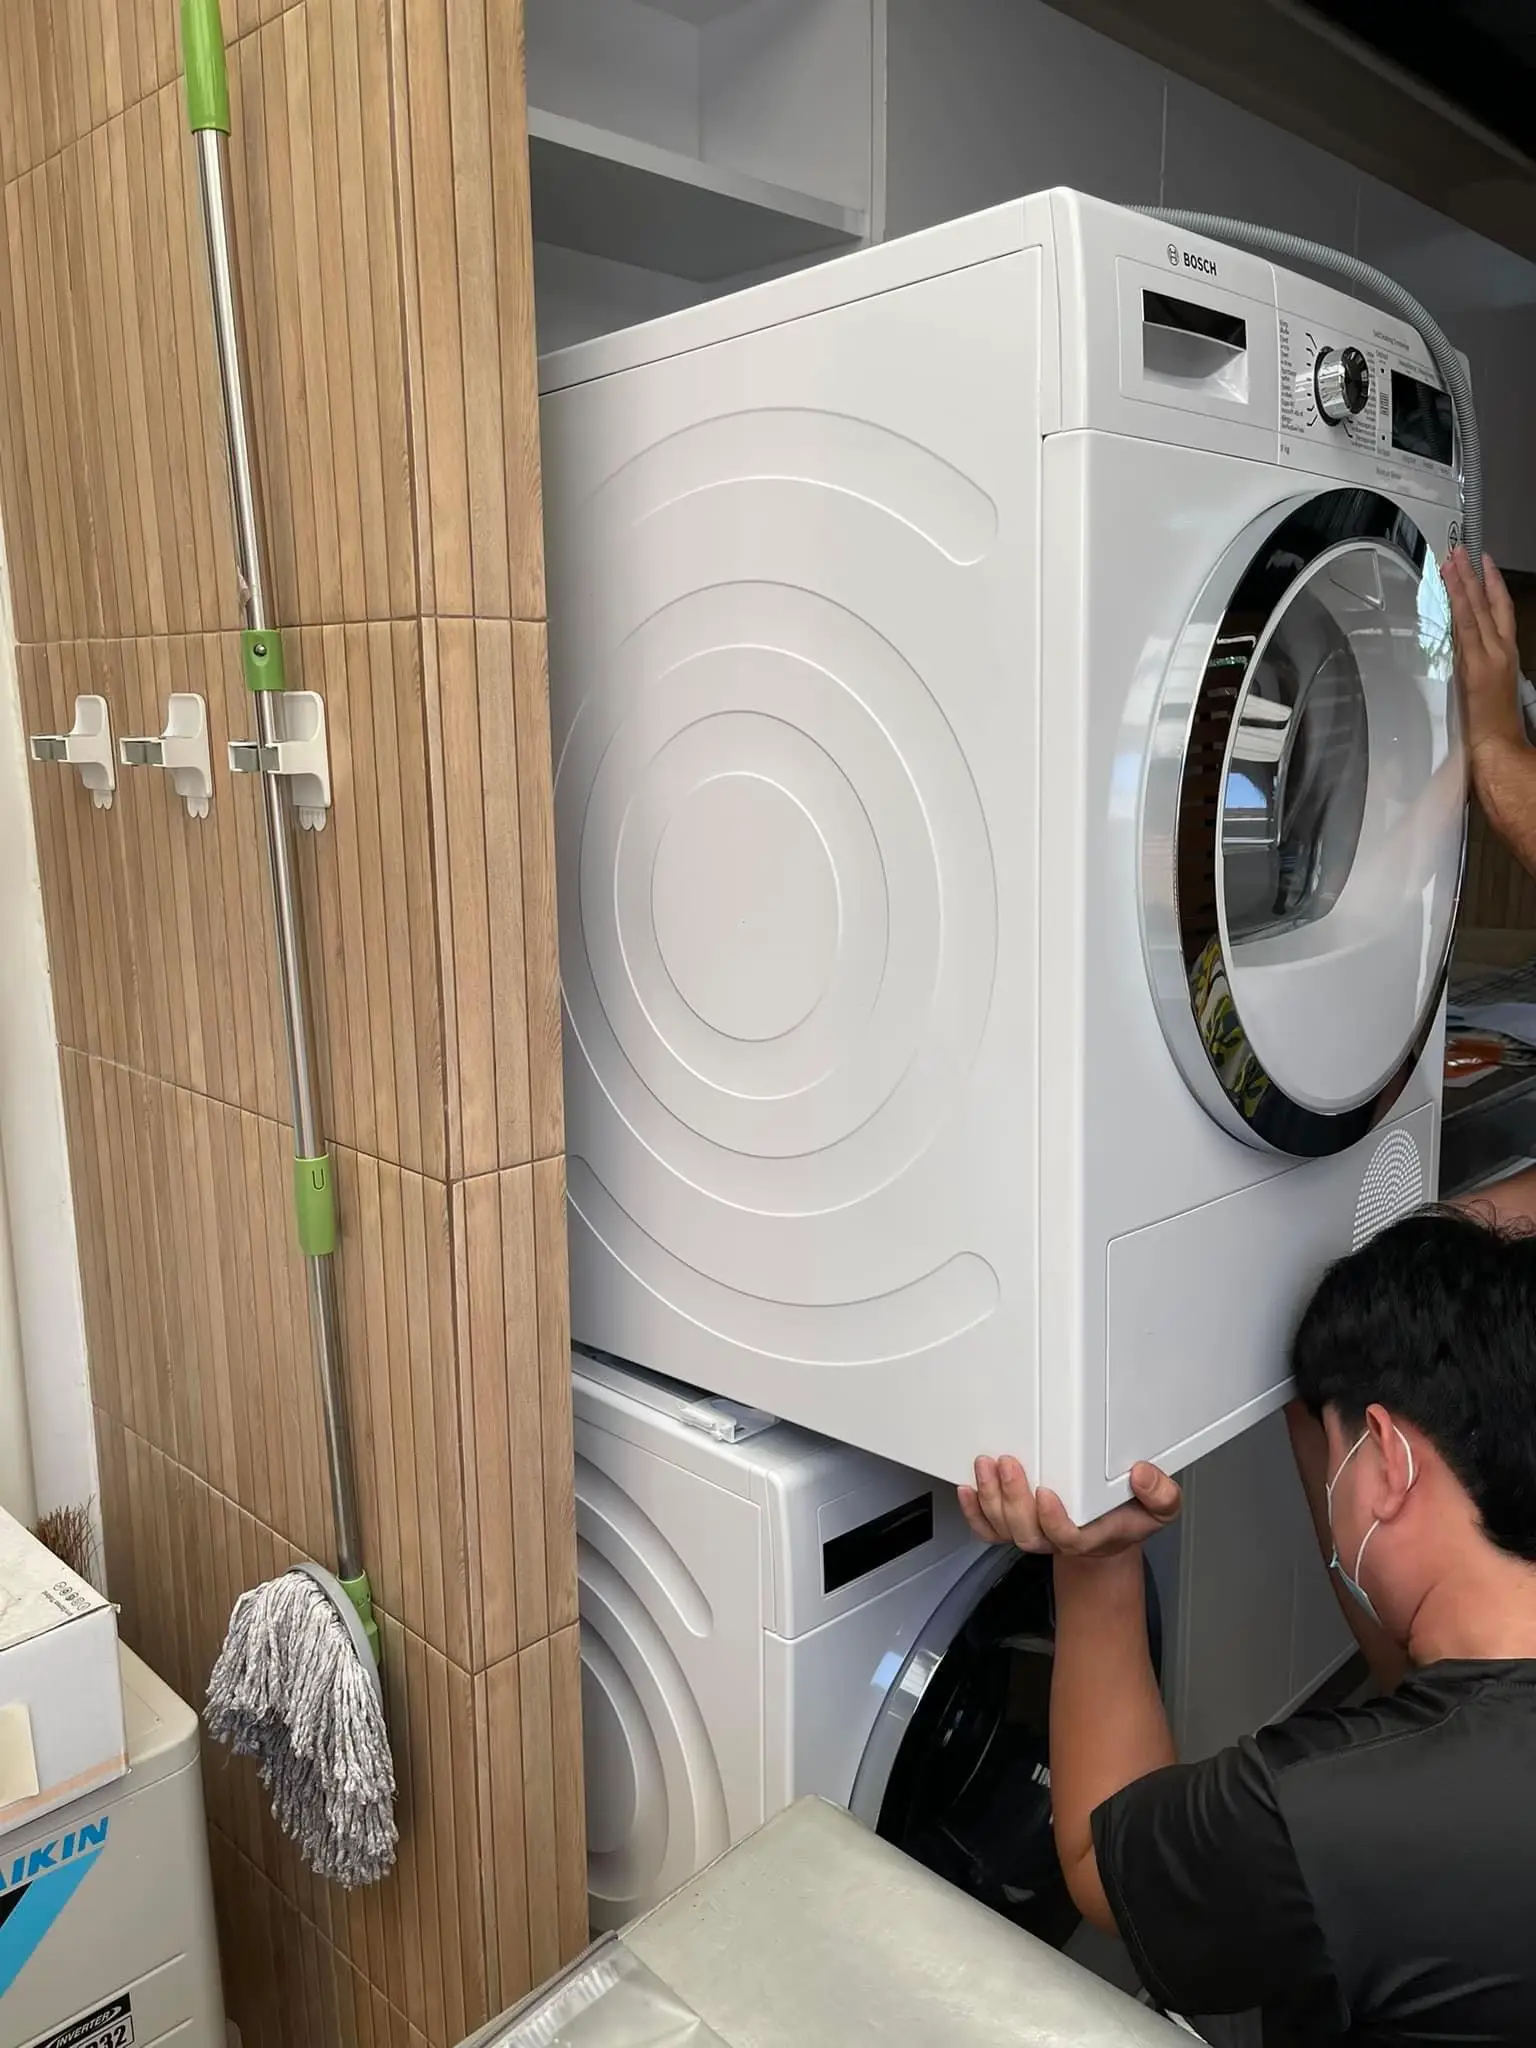  Customer reviews: Morus Portable Dryer, Compact Laundry Dryer  for Apartments, 110V Electric Dryer with Stainless Steel Tub, Easy Control  for 8 Automatic Modes with Child Lock, Fast Dryer without Installation,  White